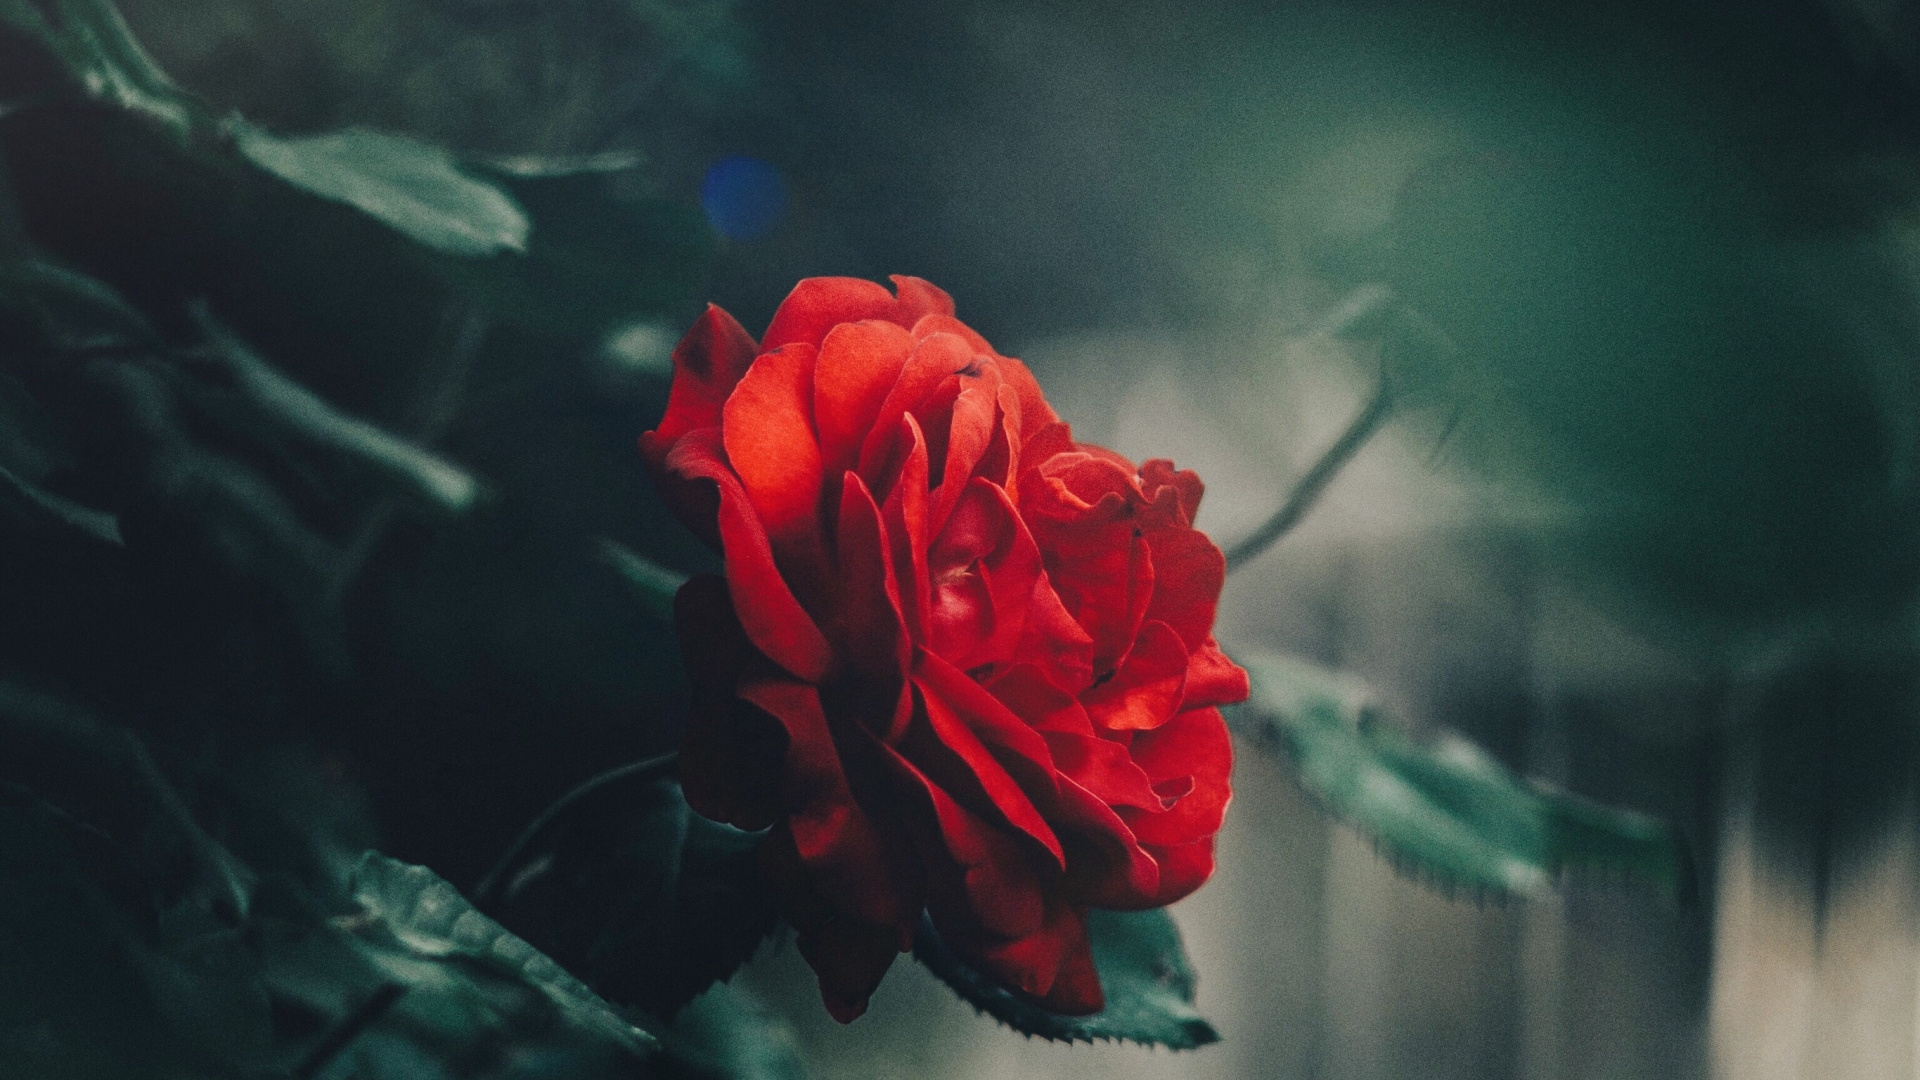 Red Rose in Bloom During Daytime. Wallpaper in 1920x1080 Resolution